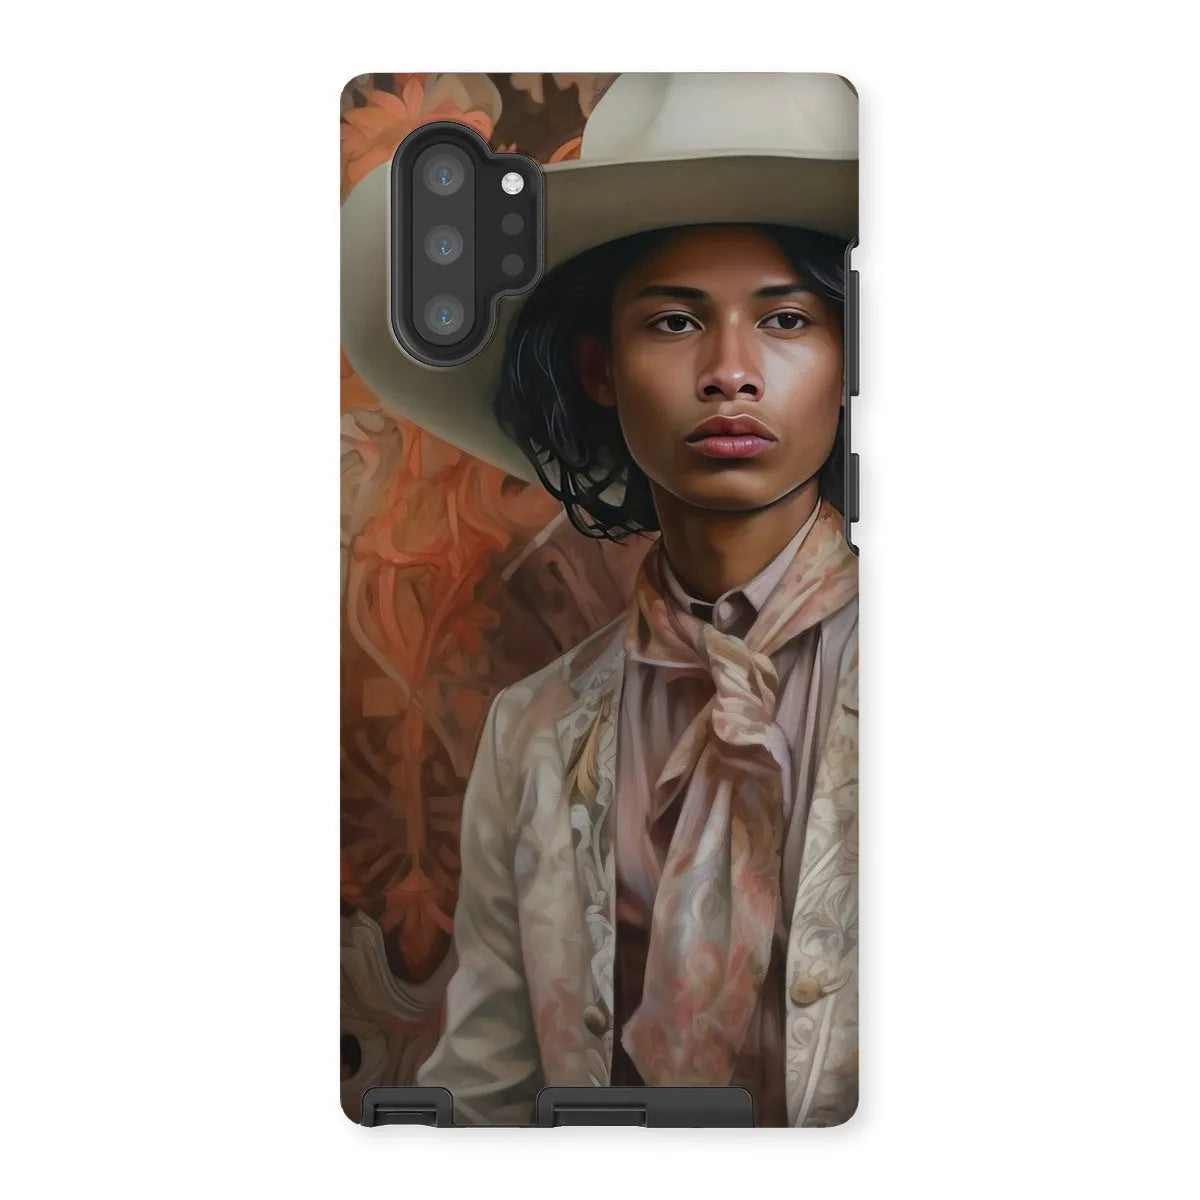 Arjuna - Gay South Asian Cowboy Art Phone Case - Samsung Galaxy Note 10p / Matte - Mobile Phone Cases - Aesthetic Art